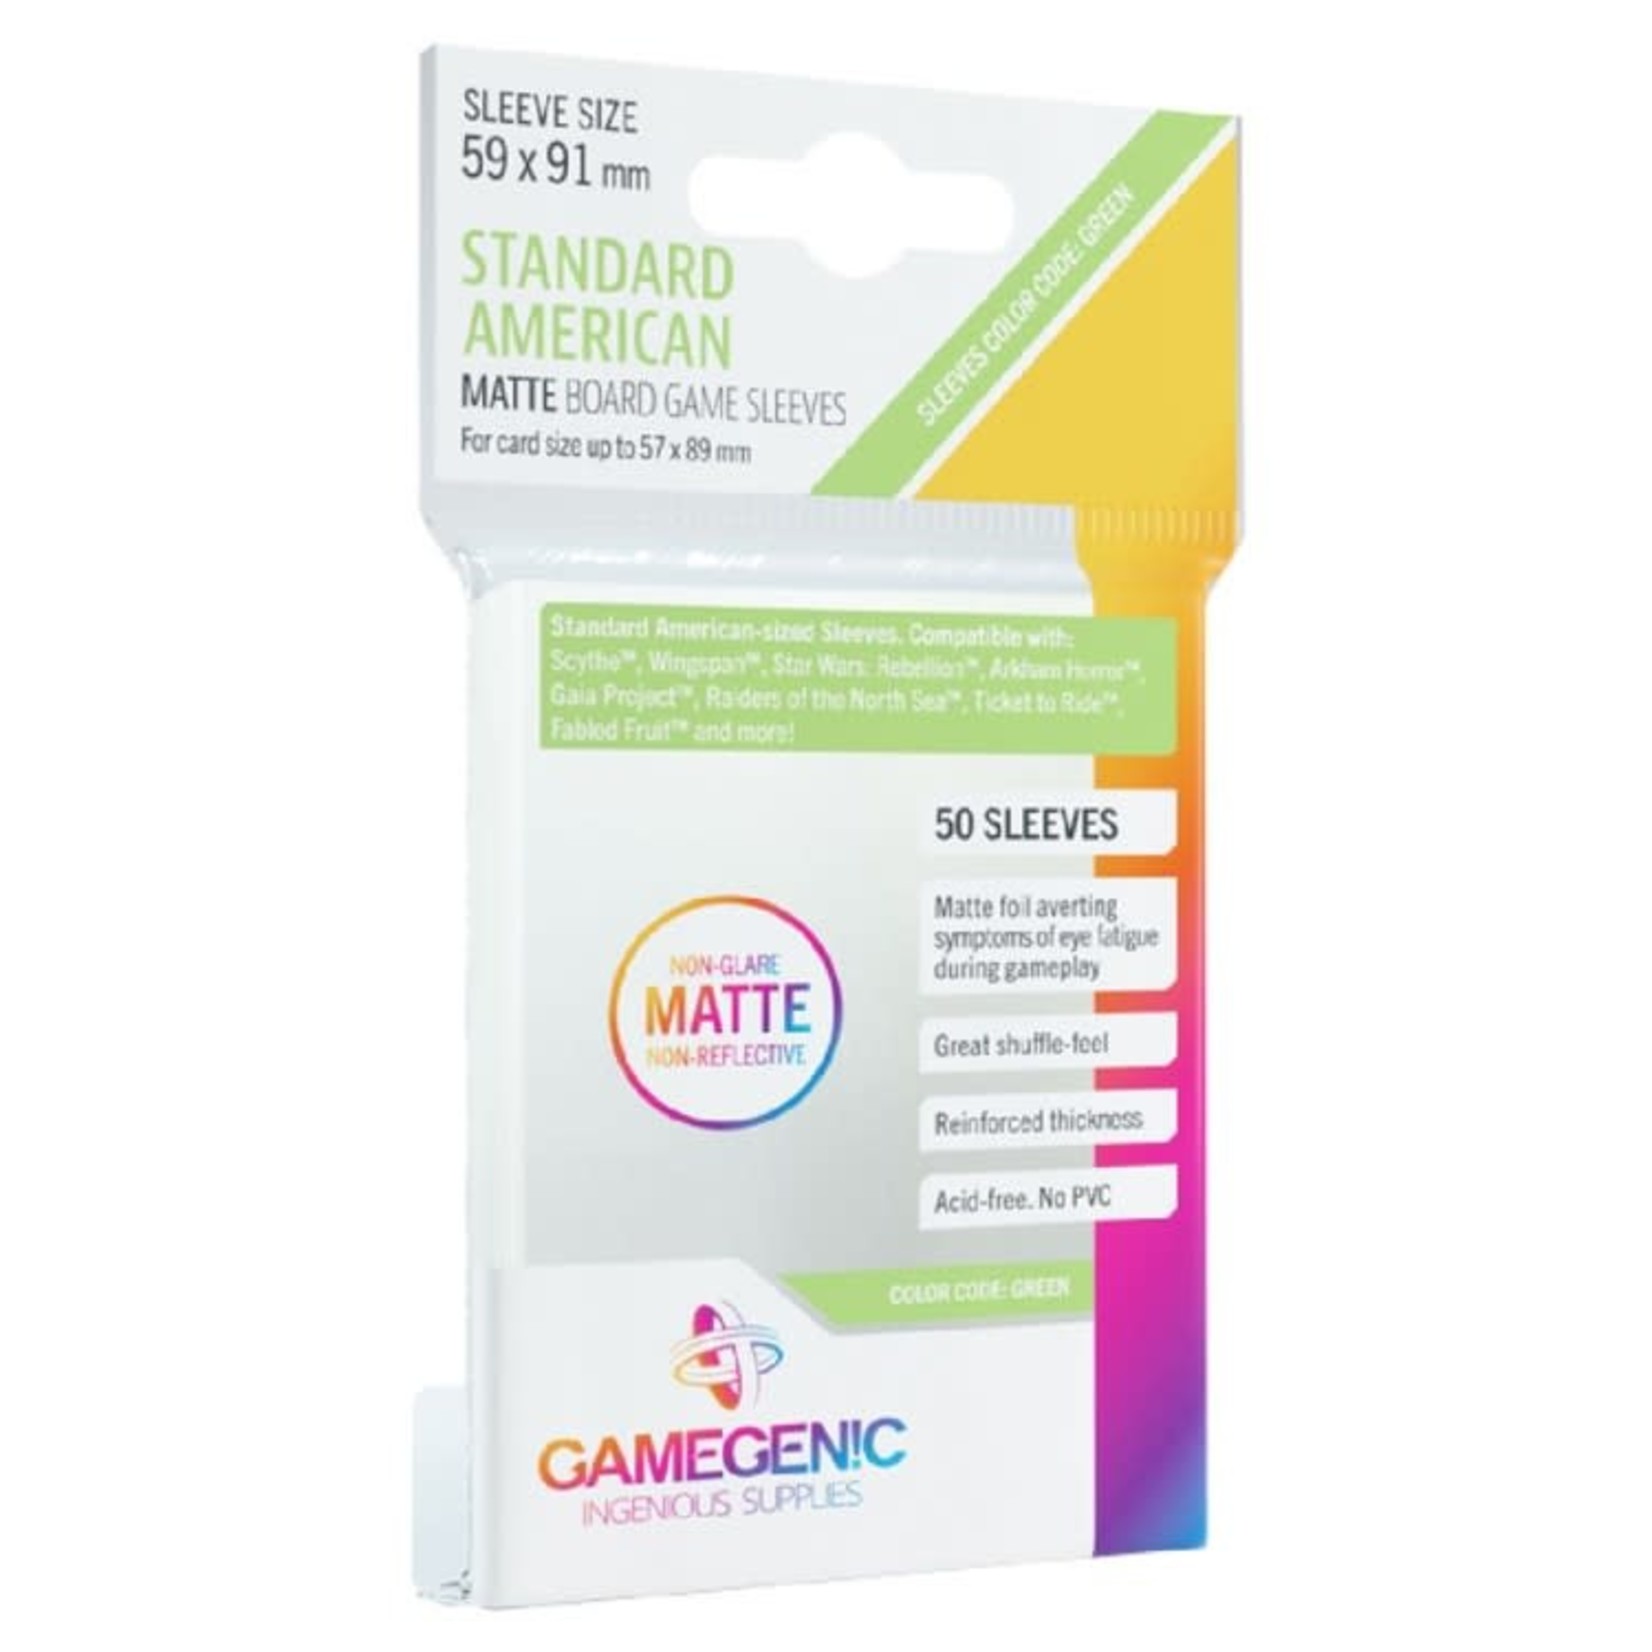 Gamegenic Gamegenic Sleeves: Standard American MATTE - 50 count (59x91mm)